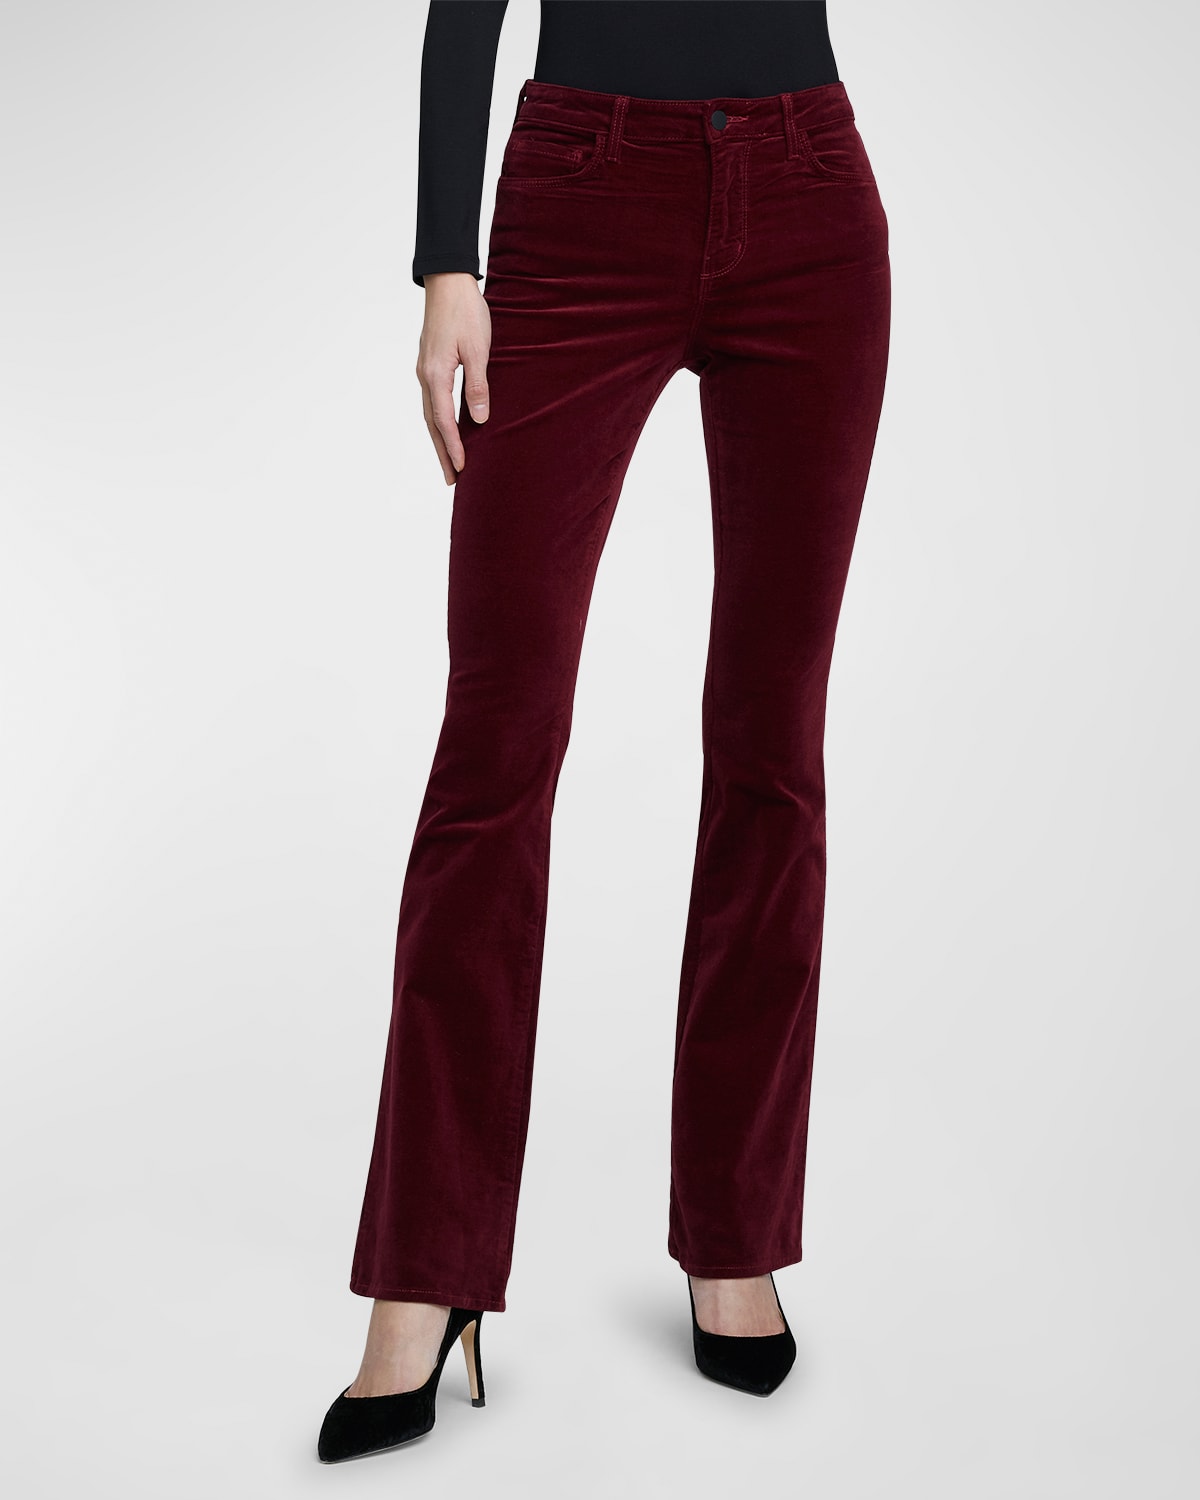 L'Agence Stevie High-Rise Straight Jeans